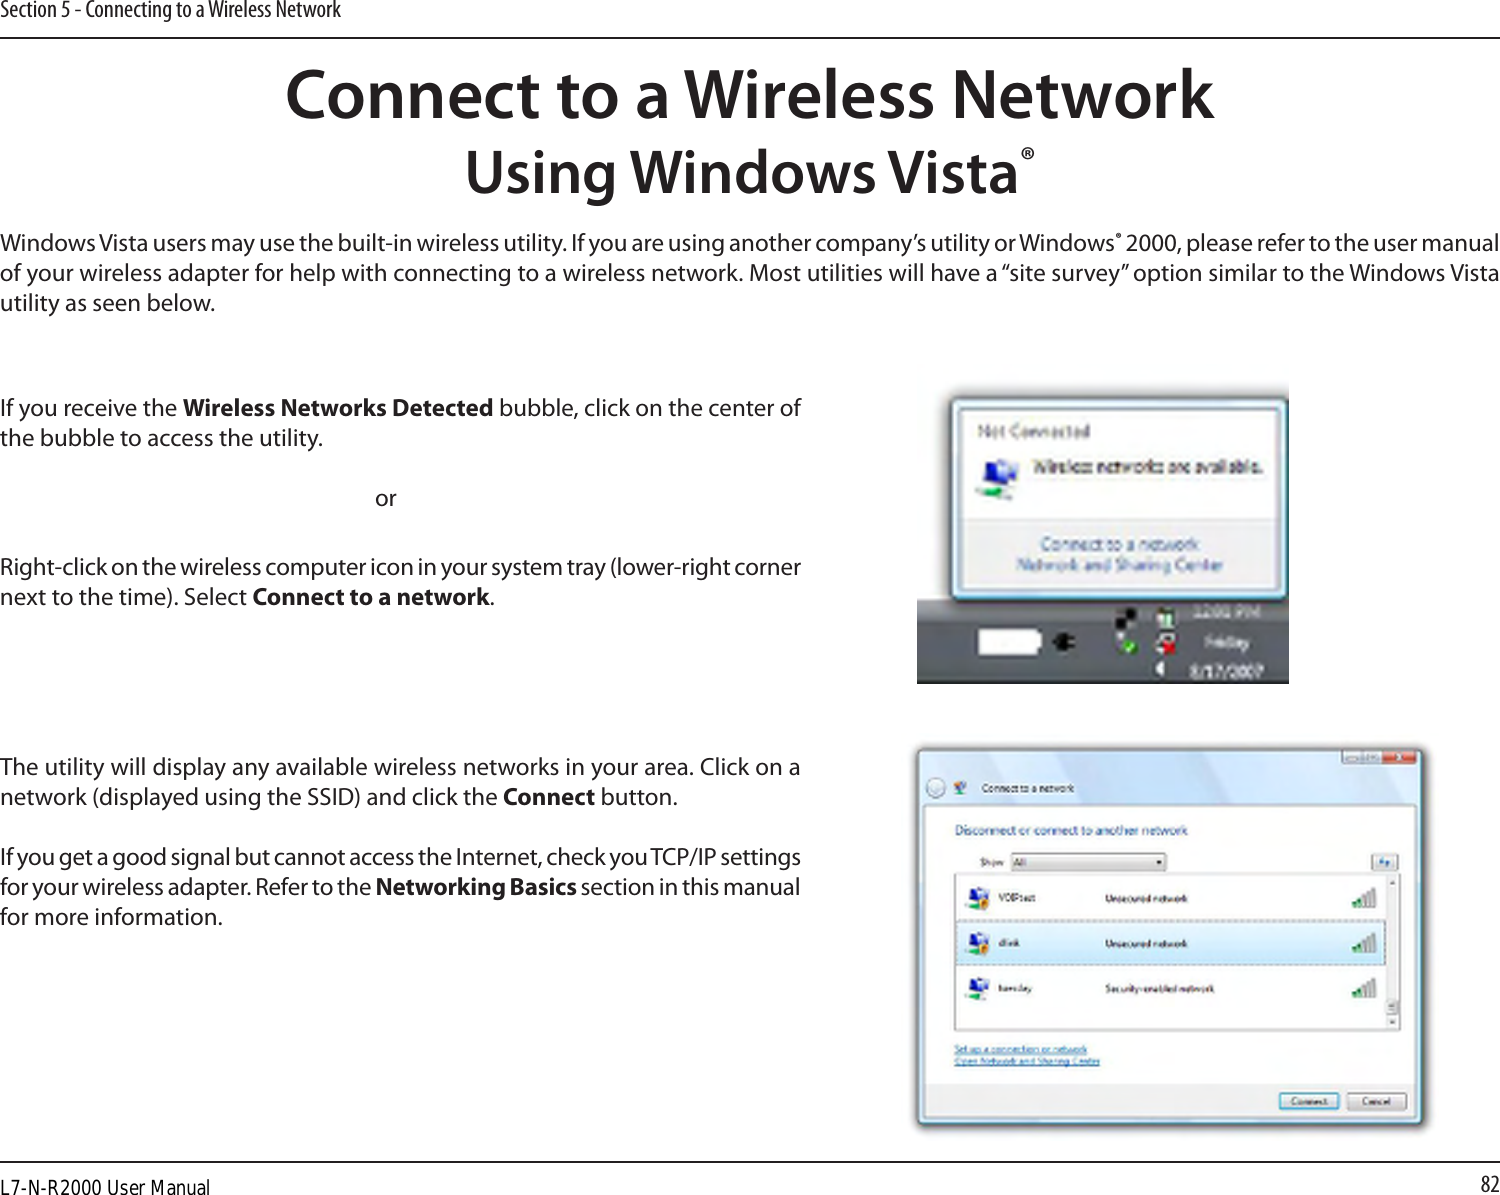 82Section 5 - Connecting to a Wireless NetworkConnect to a Wireless NetworkUsing Windows Vista®Windows Vista users may use the built-in wireless utility. If you are using another company’s utility or Windows® 2000, please refer to the user manual of your wireless adapter for help with connecting to a wireless network. Most utilities will have a “site survey” option similar to the Windows Vista utility as seen below.Right-click on the wireless computer icon in your system tray (lower-right corner next to the time). Select Connect to a network.If you receive the Wireless Networks Detected bubble, click on the center of the bubble to access the utility.     orThe utility will display any available wireless networks in your area. Click on a network (displayed using the SSID) and click the Connect button.If you get a good signal but cannot access the Internet, check you TCP/IP settings for your wireless adapter. Refer to the Networking Basics section in this manual for more information.L7-N-R2000 User Manual